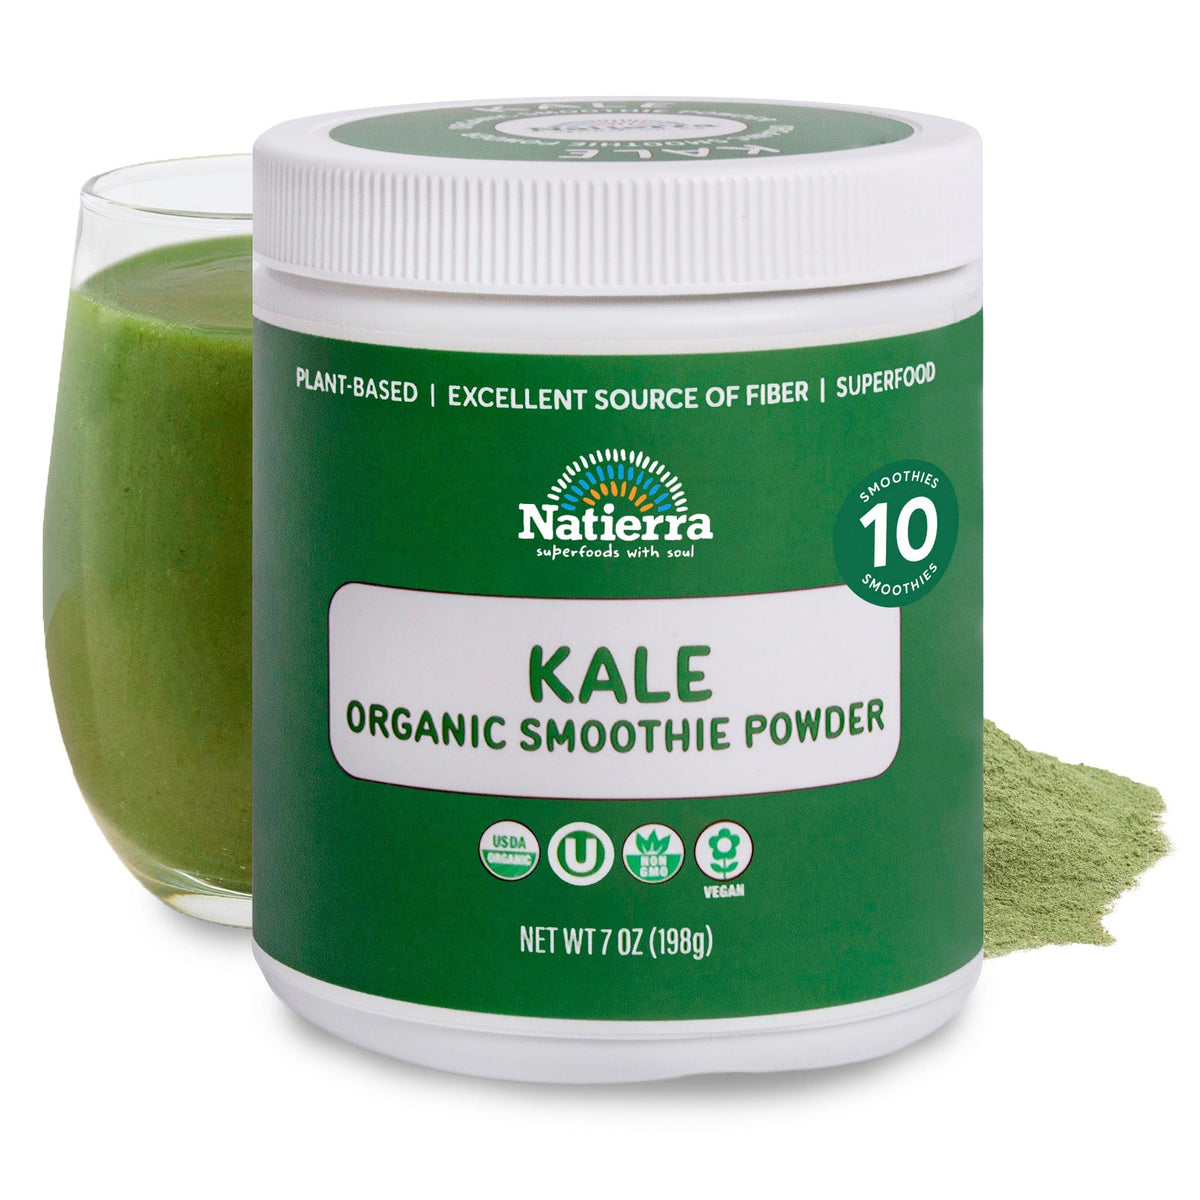 Natierra Kale Organic Smoothie jar with glass and powder in the background